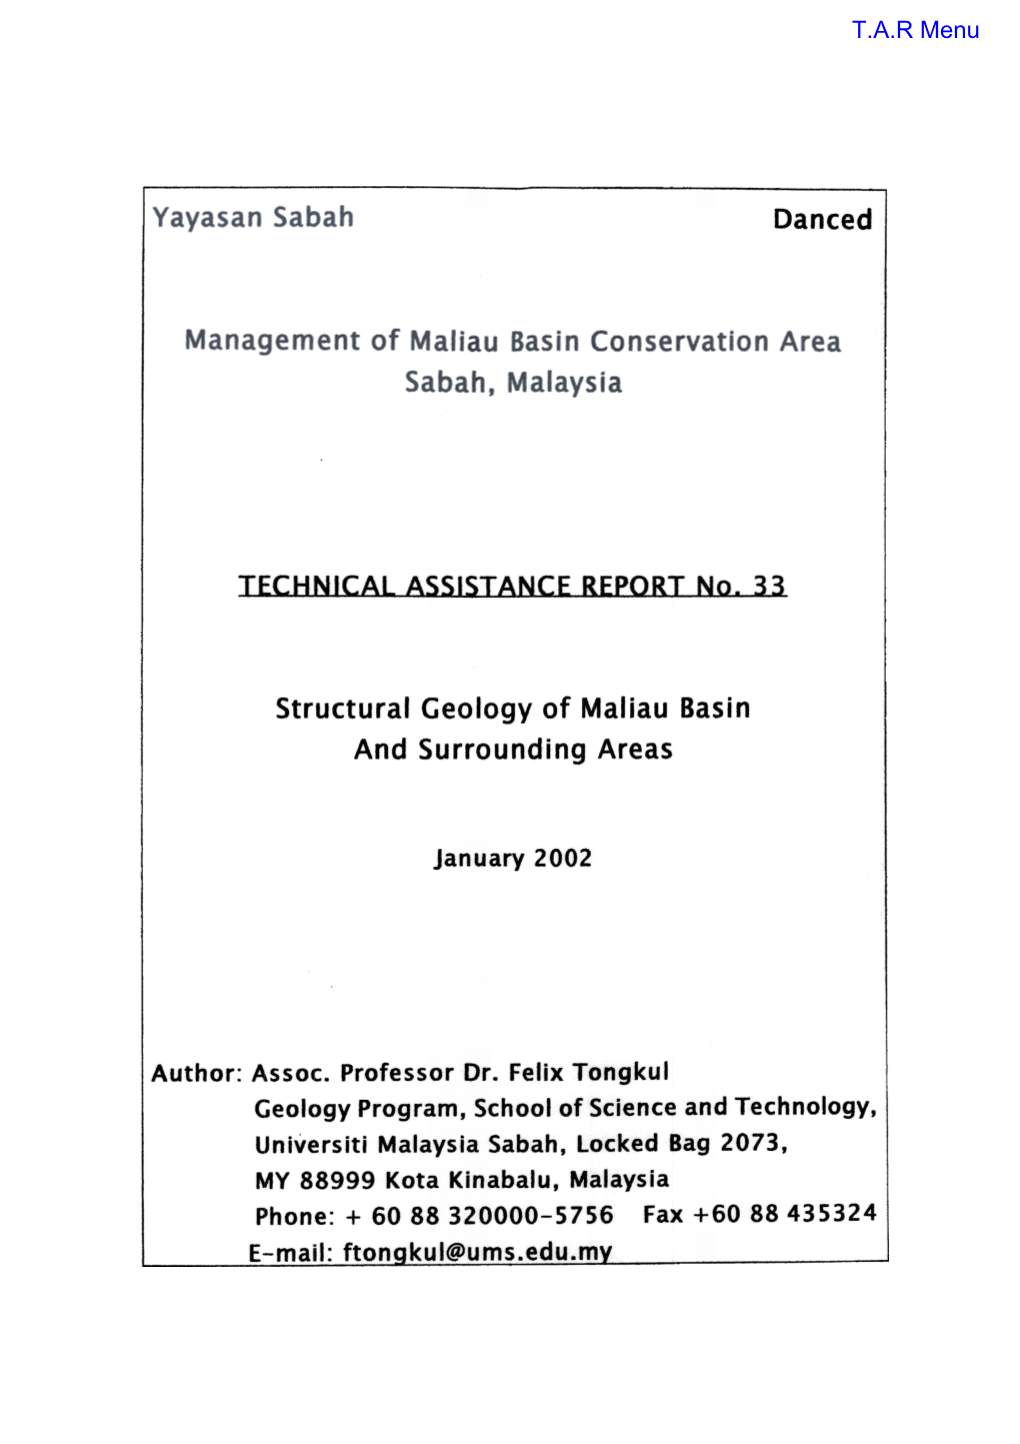 Structural Geology of Maliau Basin and Surrounding